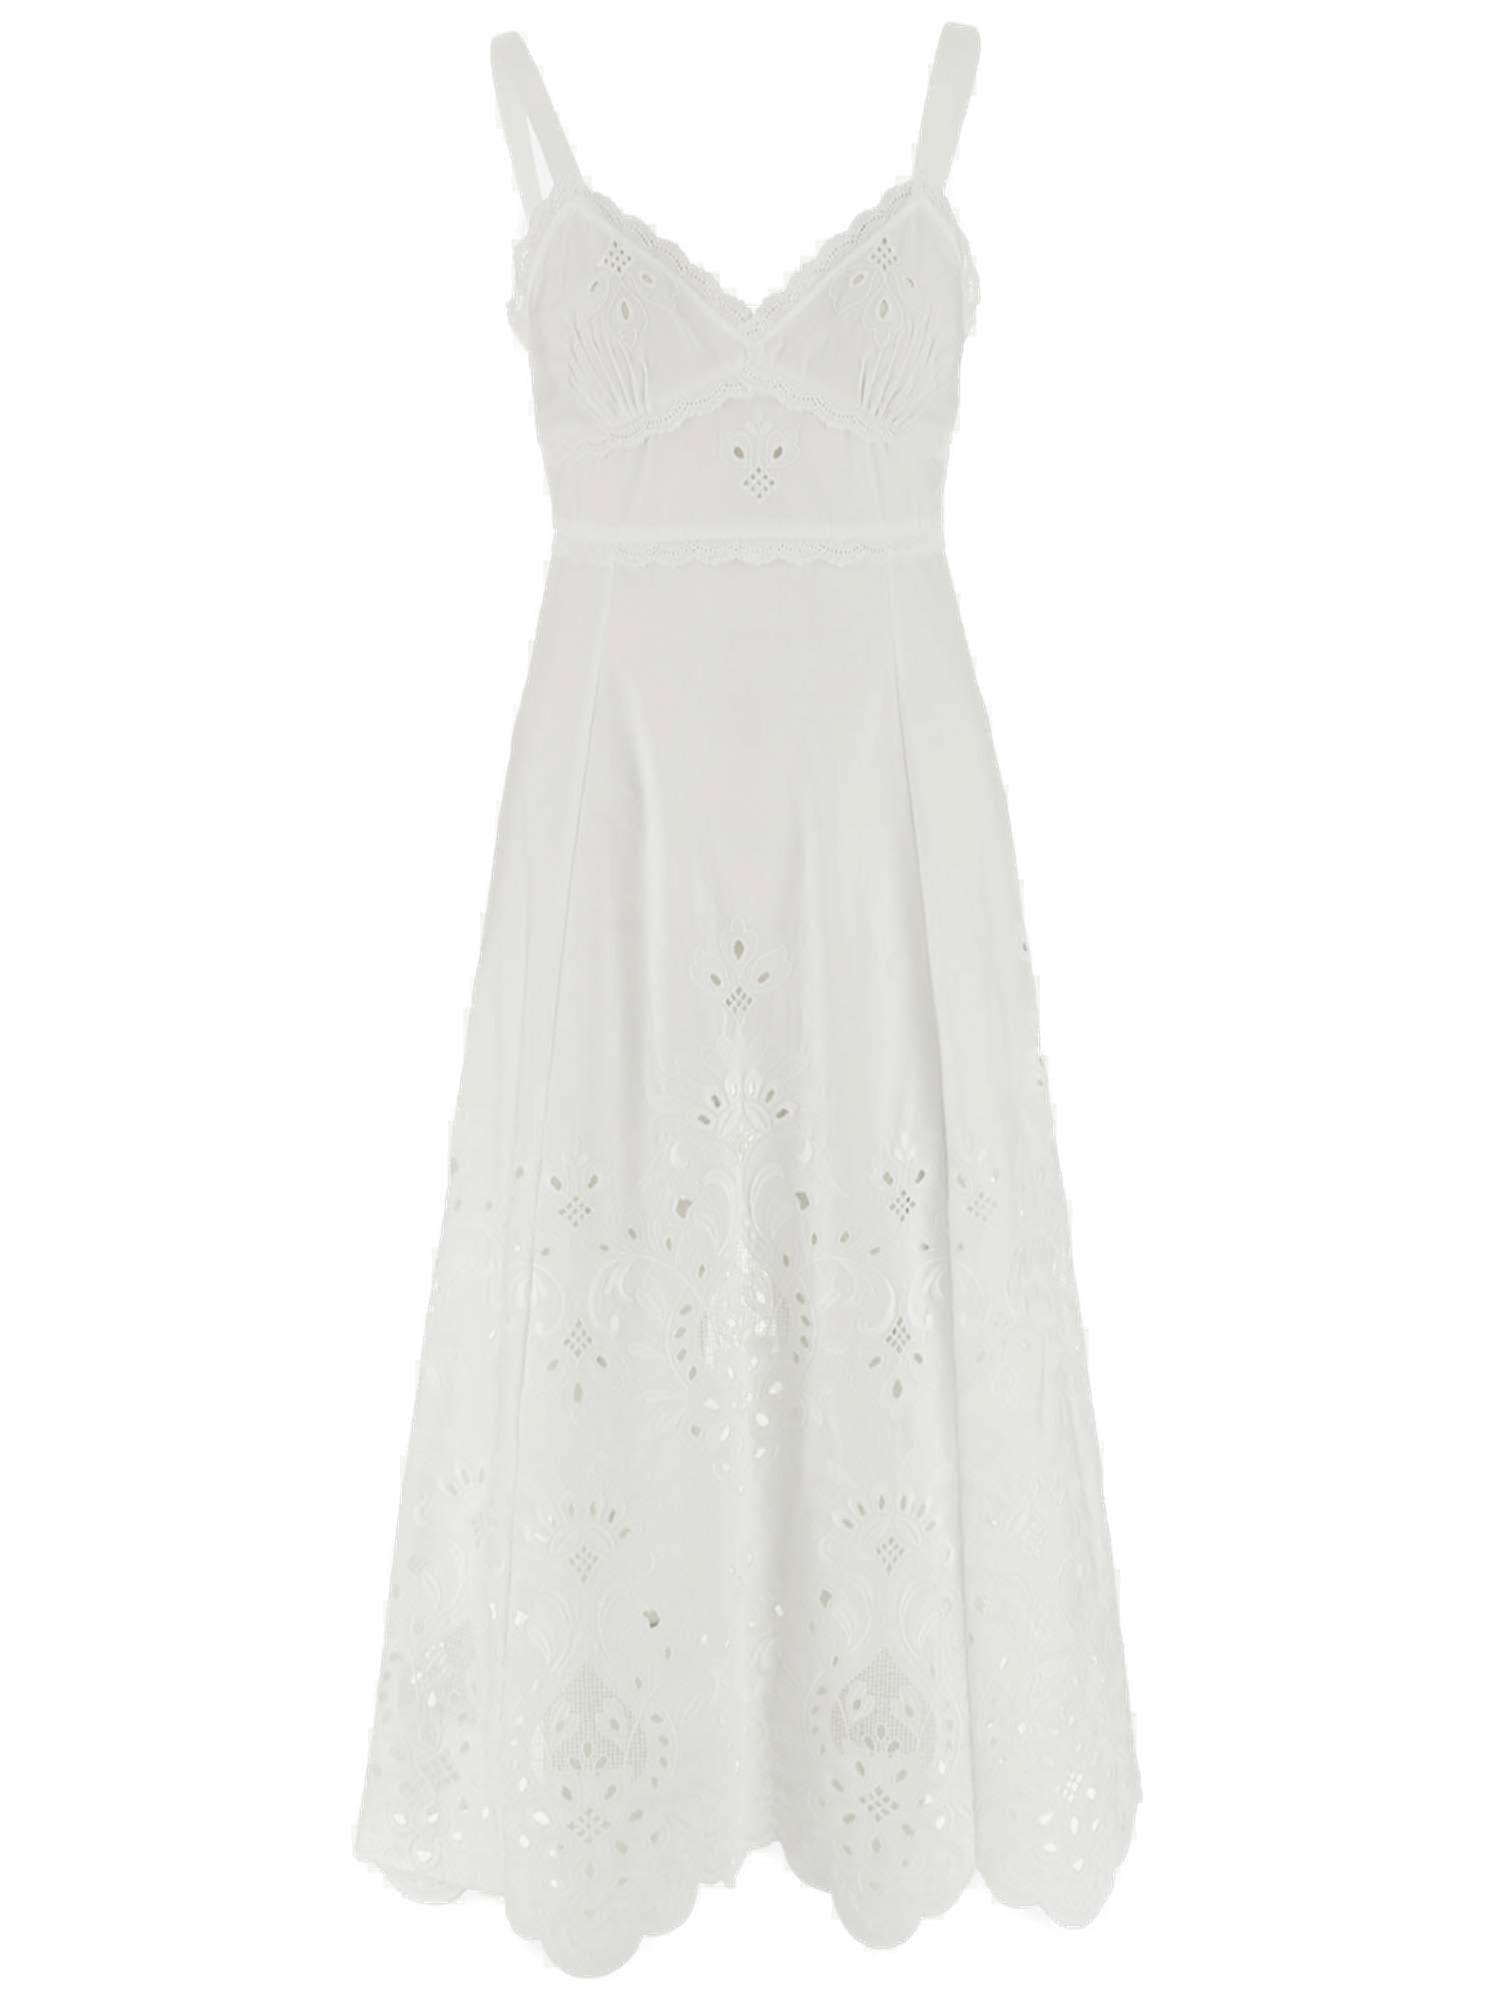 Dolce & Gabbana Cut Out Embroidered Dress